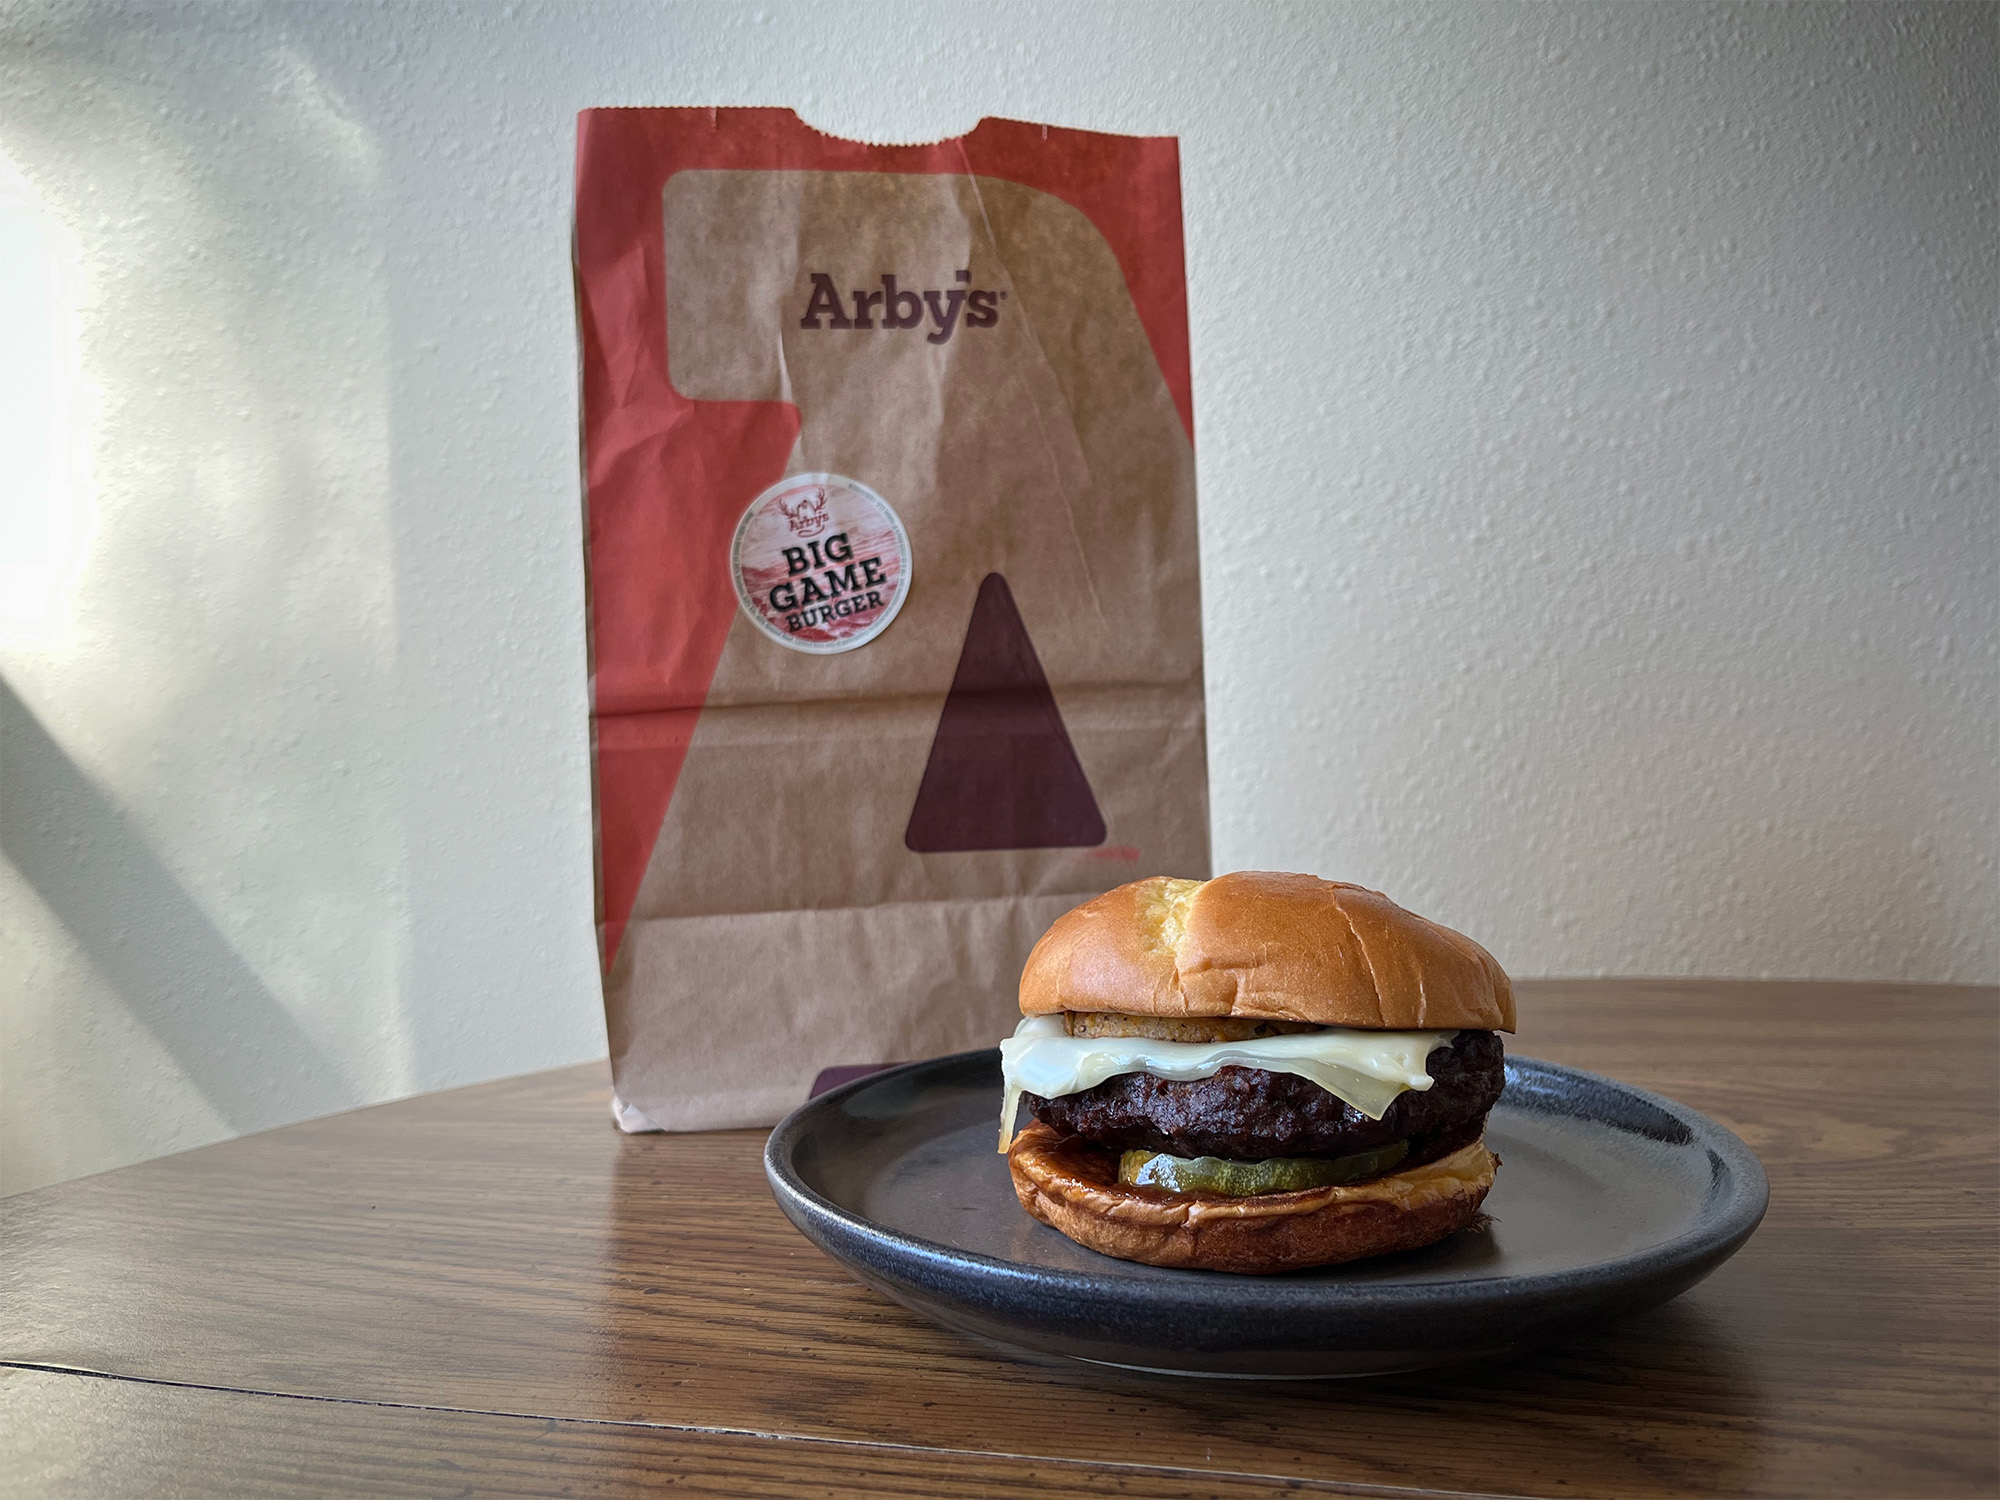 arby's big game burger